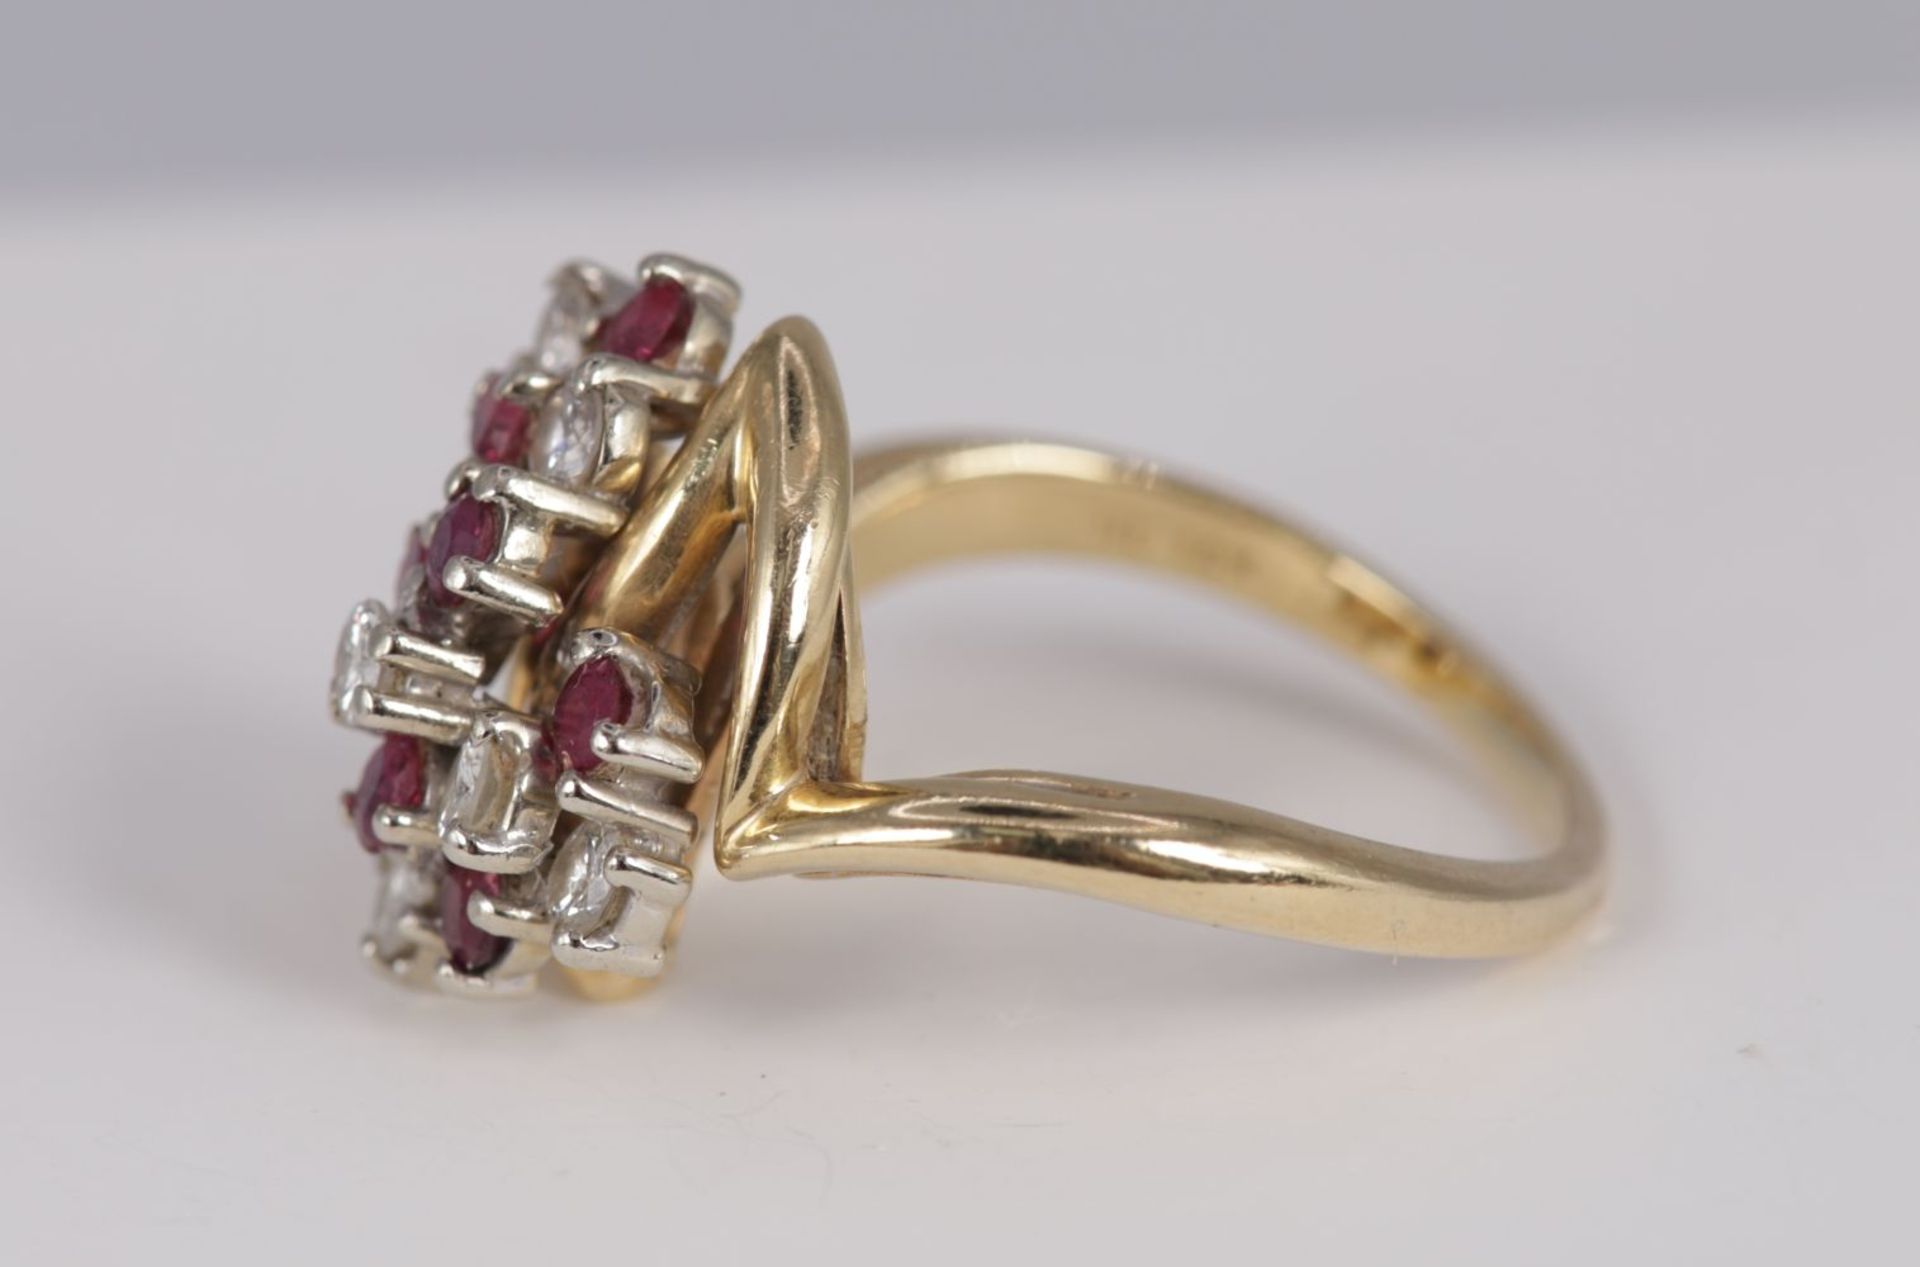 14K GOLD, DIAMOND AND RUBY RING - Image 2 of 4